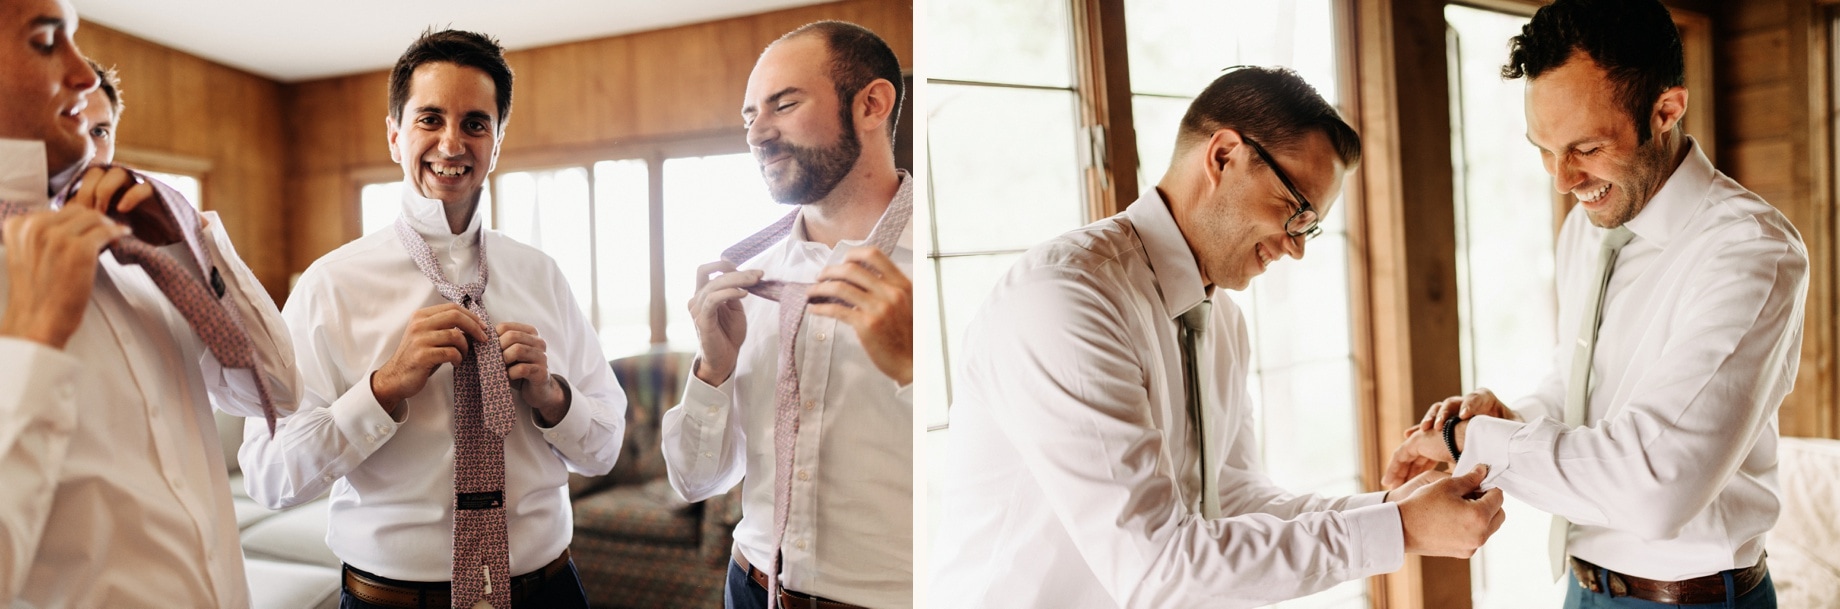 groom getting dressed with his friends on his wedding day